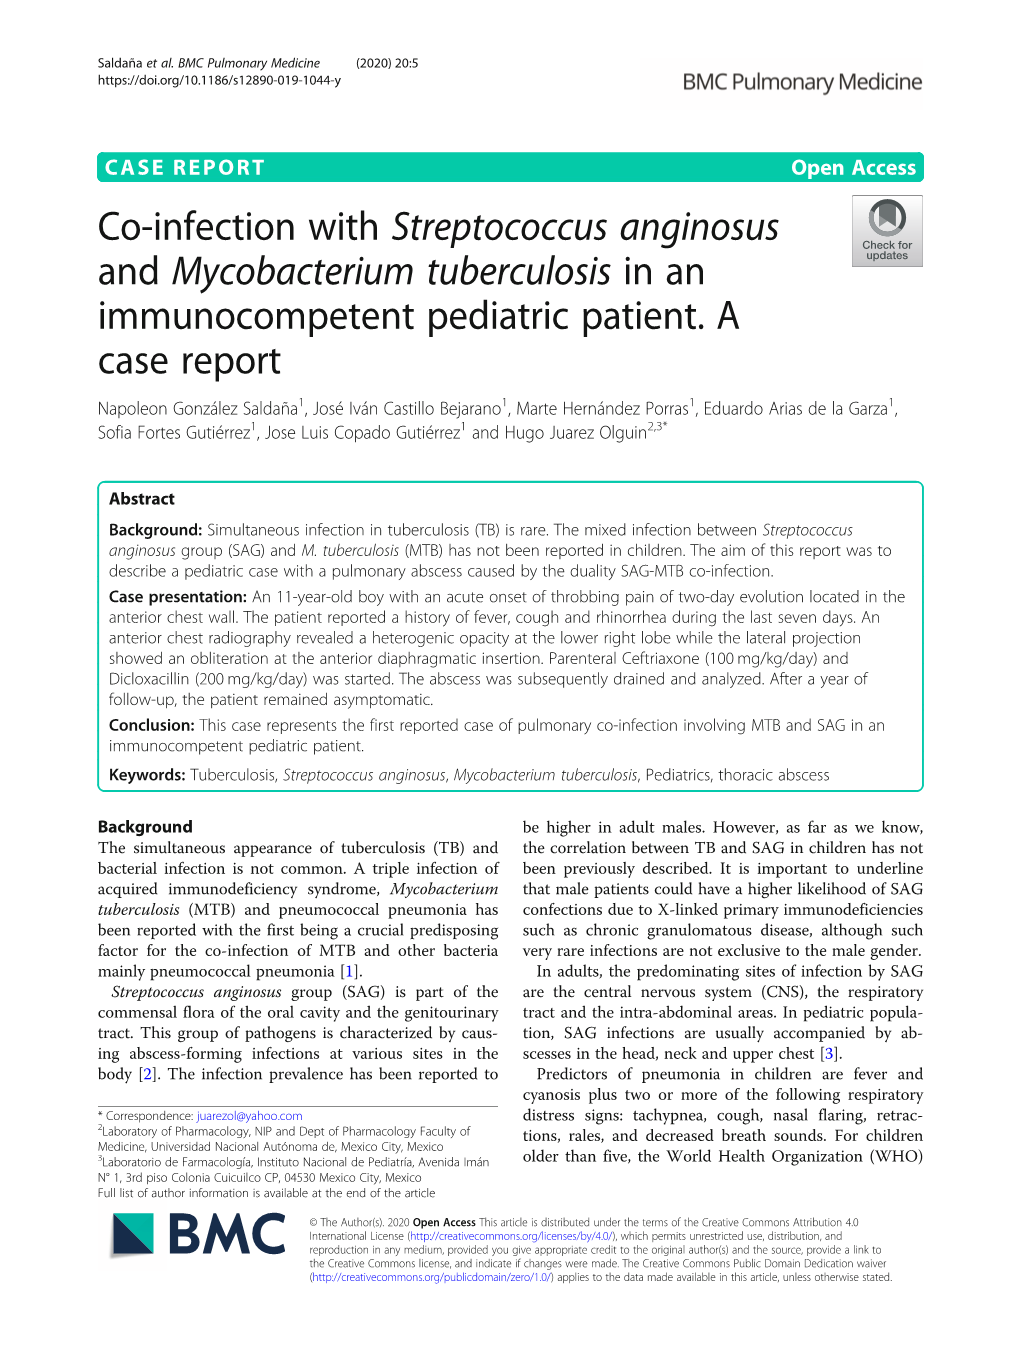 Co-Infection with Streptococcus Anginosus and Mycobacterium Tuberculosis in an Immunocompetent Pediatric Patient